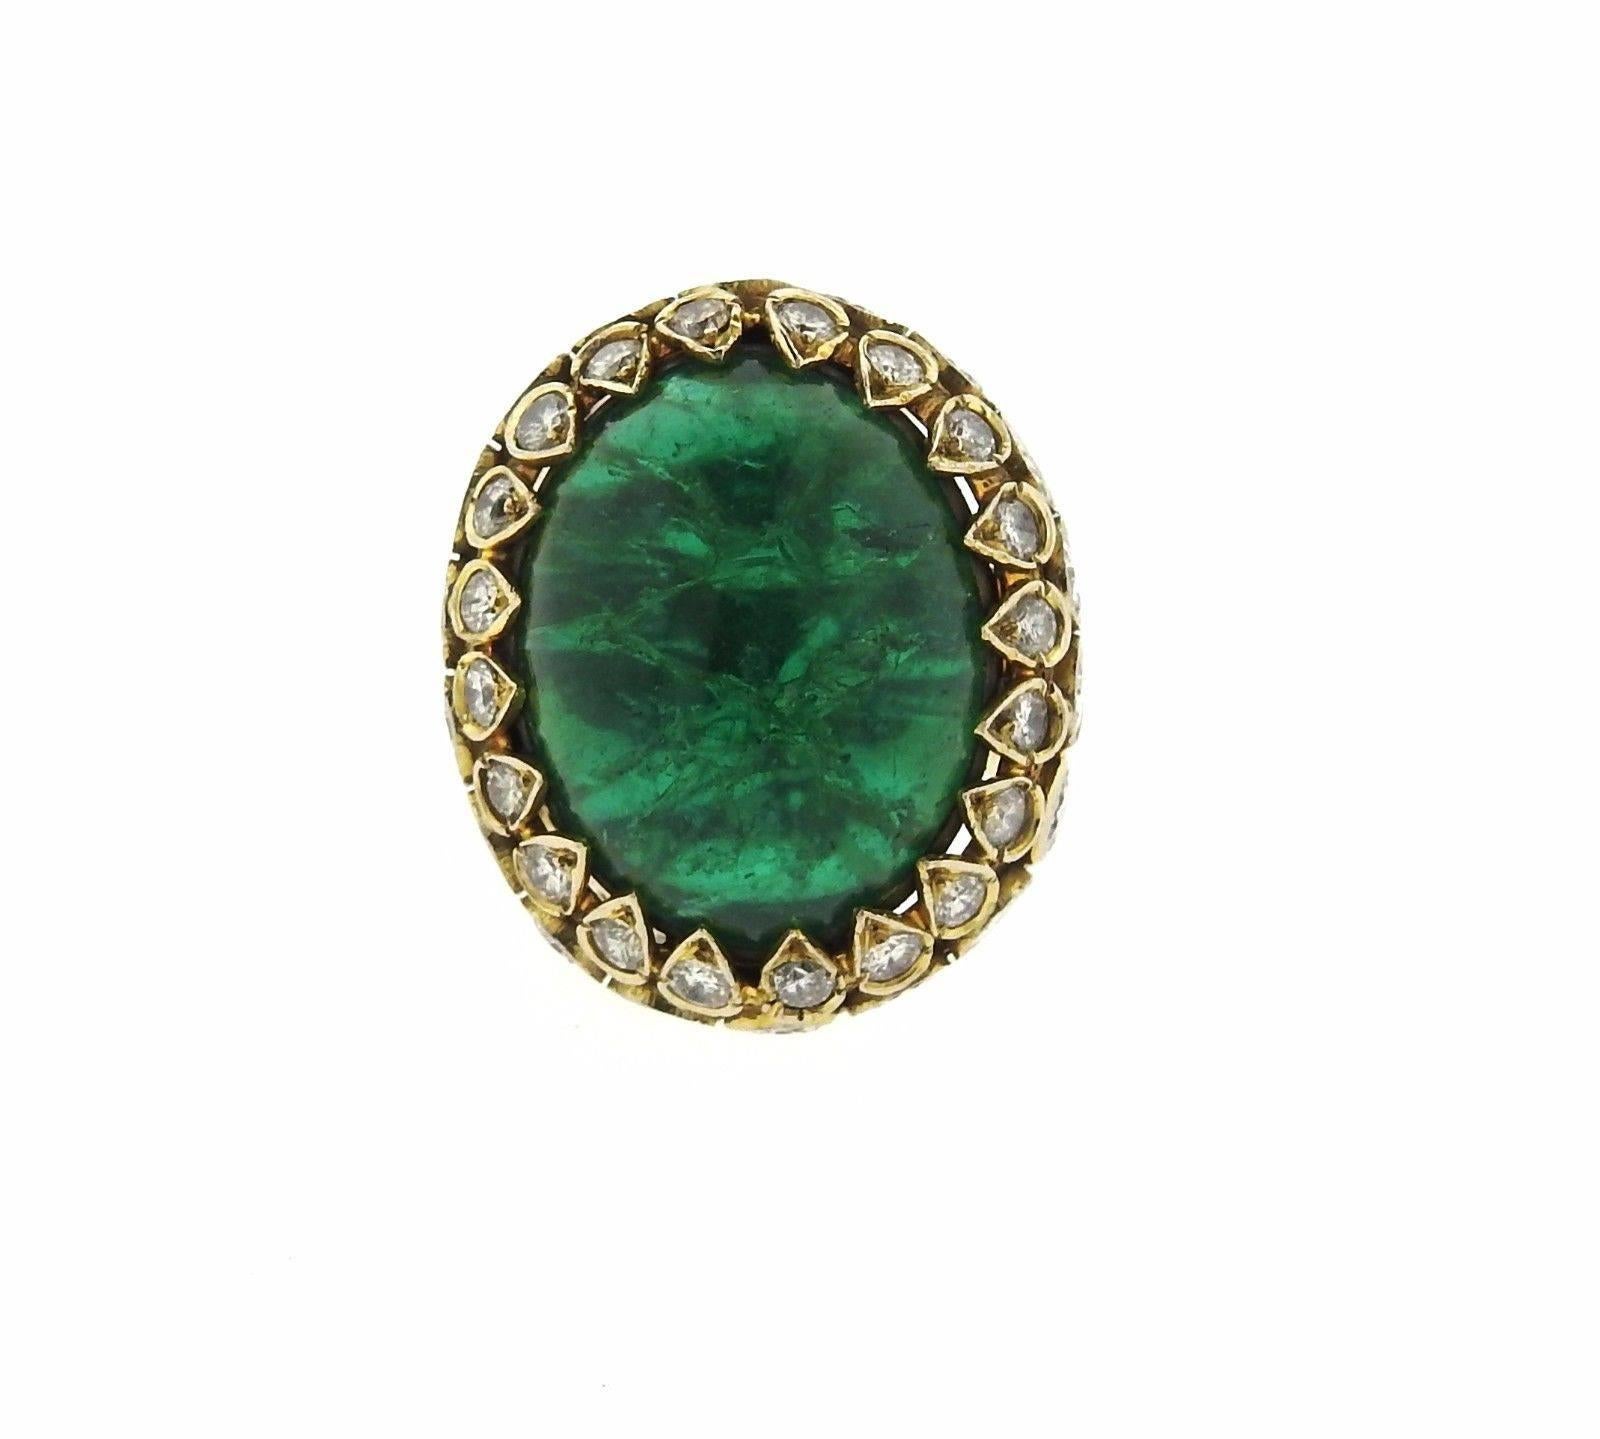 An 18k yellow gold ring set with an emerald cabochon weighing approximately 55 carats (21mm x 18mm x 18.5mm) and approximately 5.70ctw of H/VS-SI diamonds. The ring is a size 6 1/4 and the top of the ring is 30mm x 25mm, sits approximately 17mm from